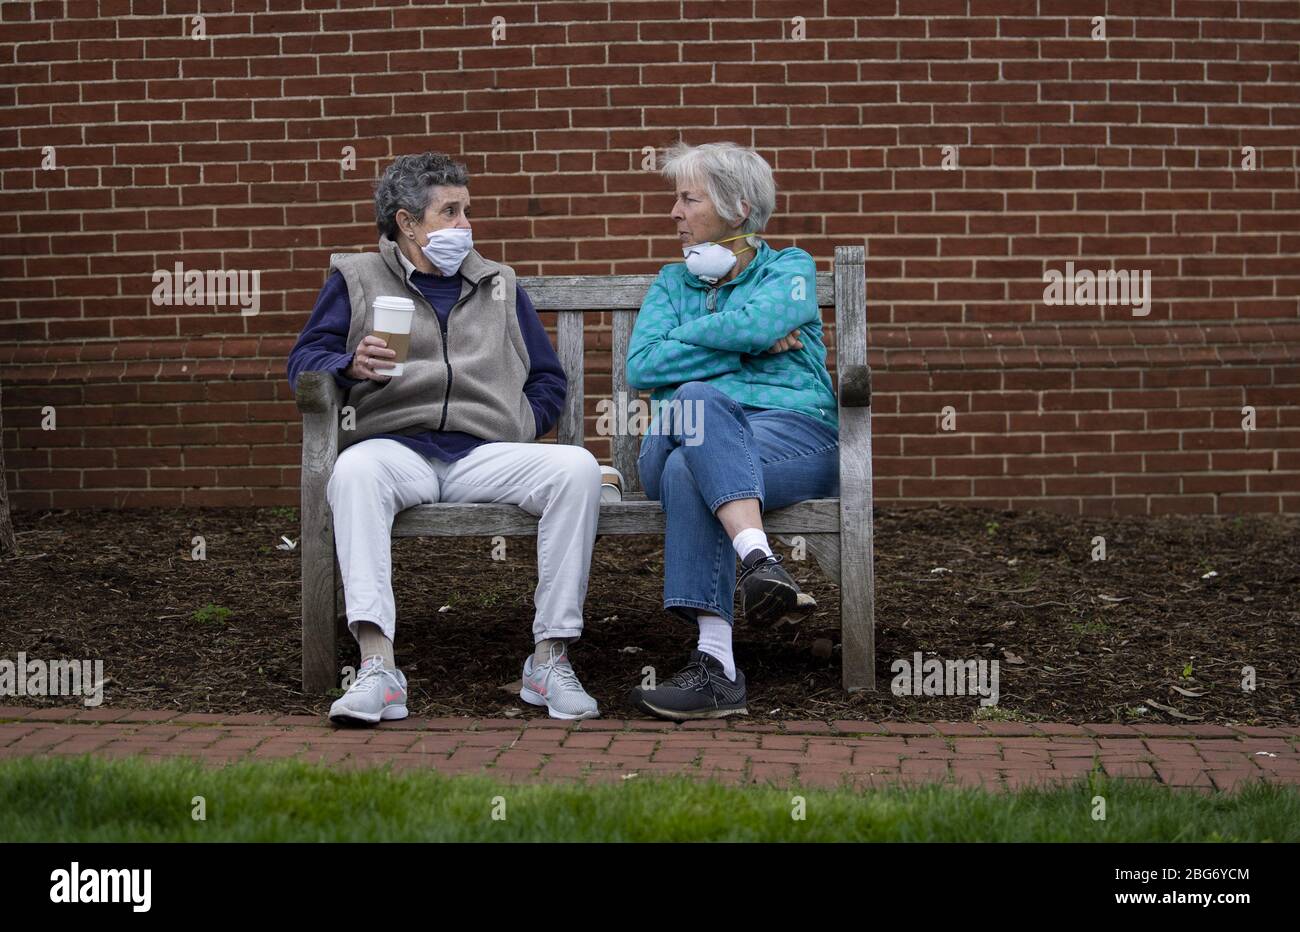 Annapolis, United States. 20th Apr, 2020. People wears masks as they sit on a bench in downtown Annapolis, Maryland amid the Coronavirus COVID-19 pandemic on Monday, April 20, 2020. Gov. Larry Hogan, R-MD, recently passed an order that requires all people must wear a face covering before going into any retail establishment.  Photo by Kevin Dietsch/UPI Stock Photo